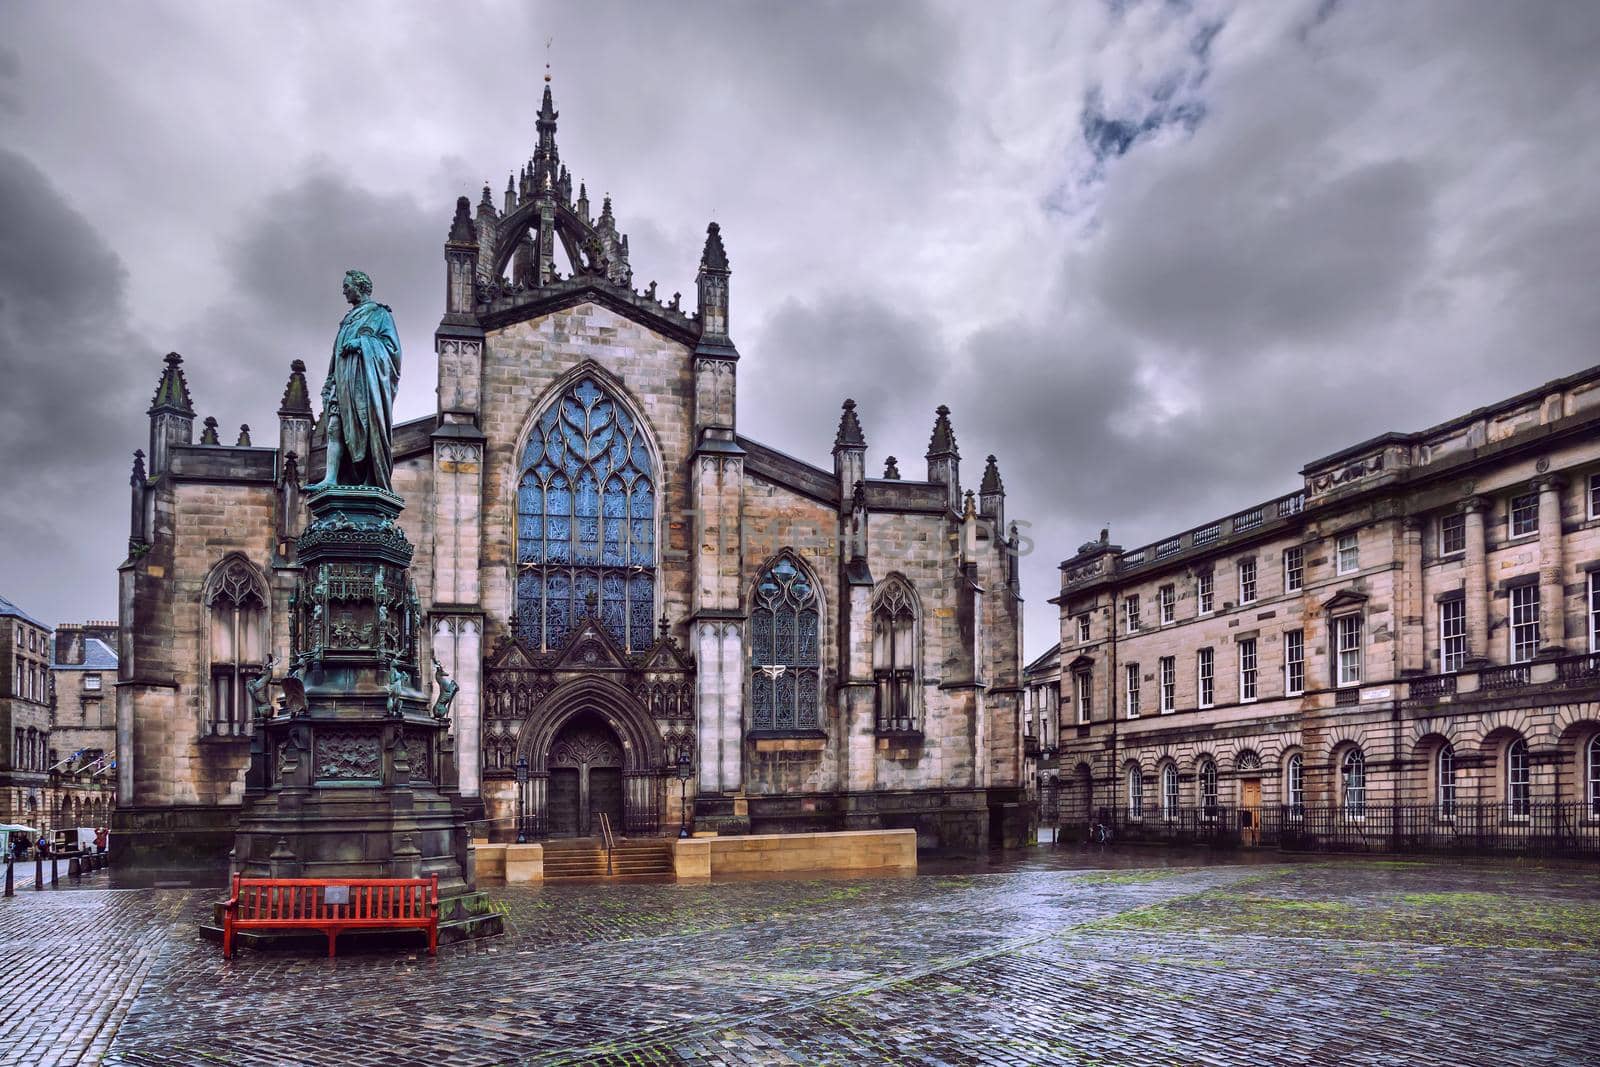 Saint Giles Cathedral also known as High Kirk of Edinburgh, Scotland by zhu_zhu